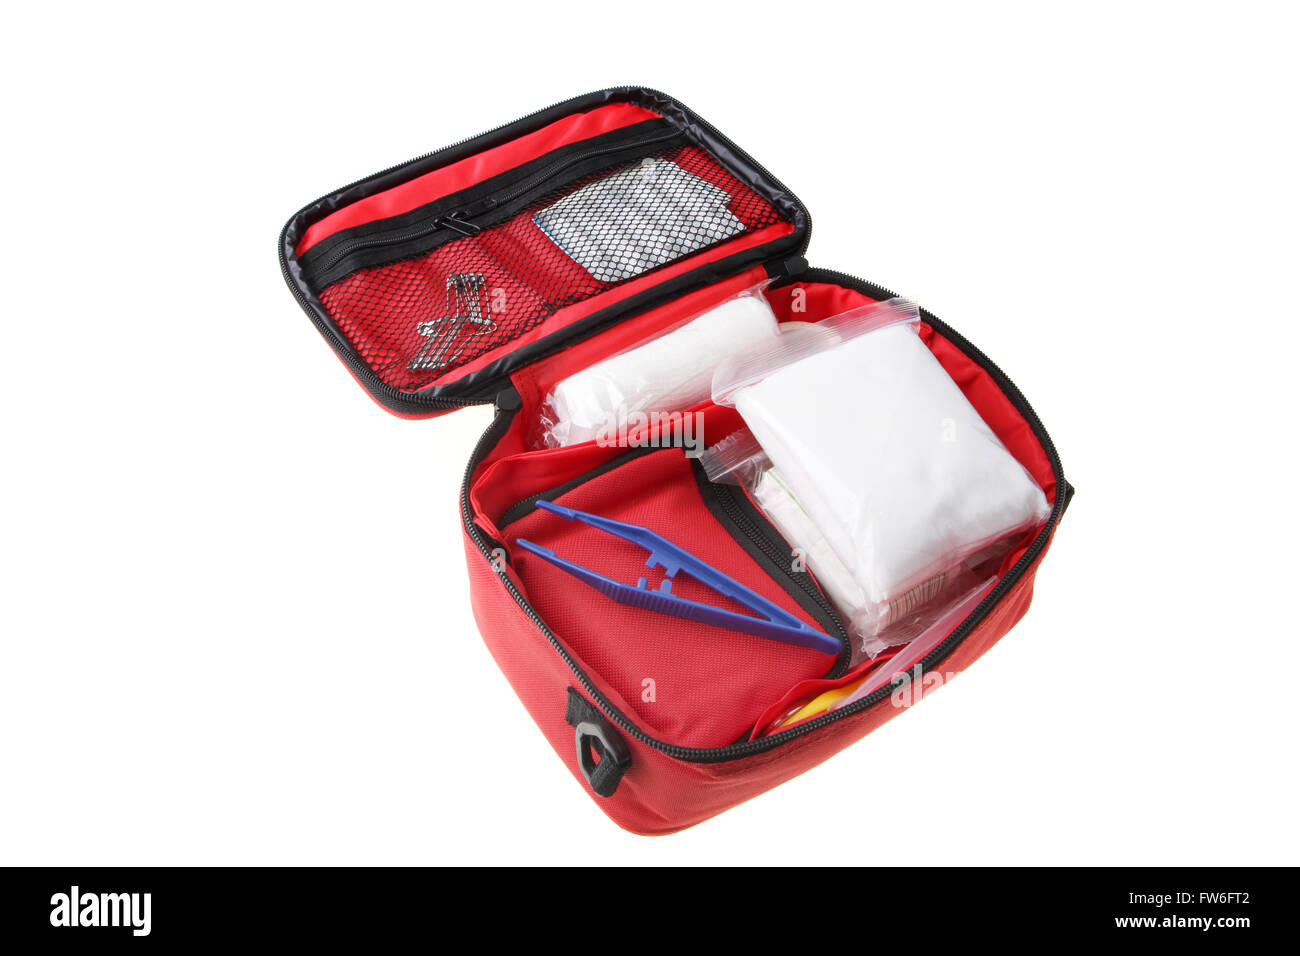 First Aid Kit showing bandages, tweezers; safety pins in a red soft case isolated on white background. Stock Photo